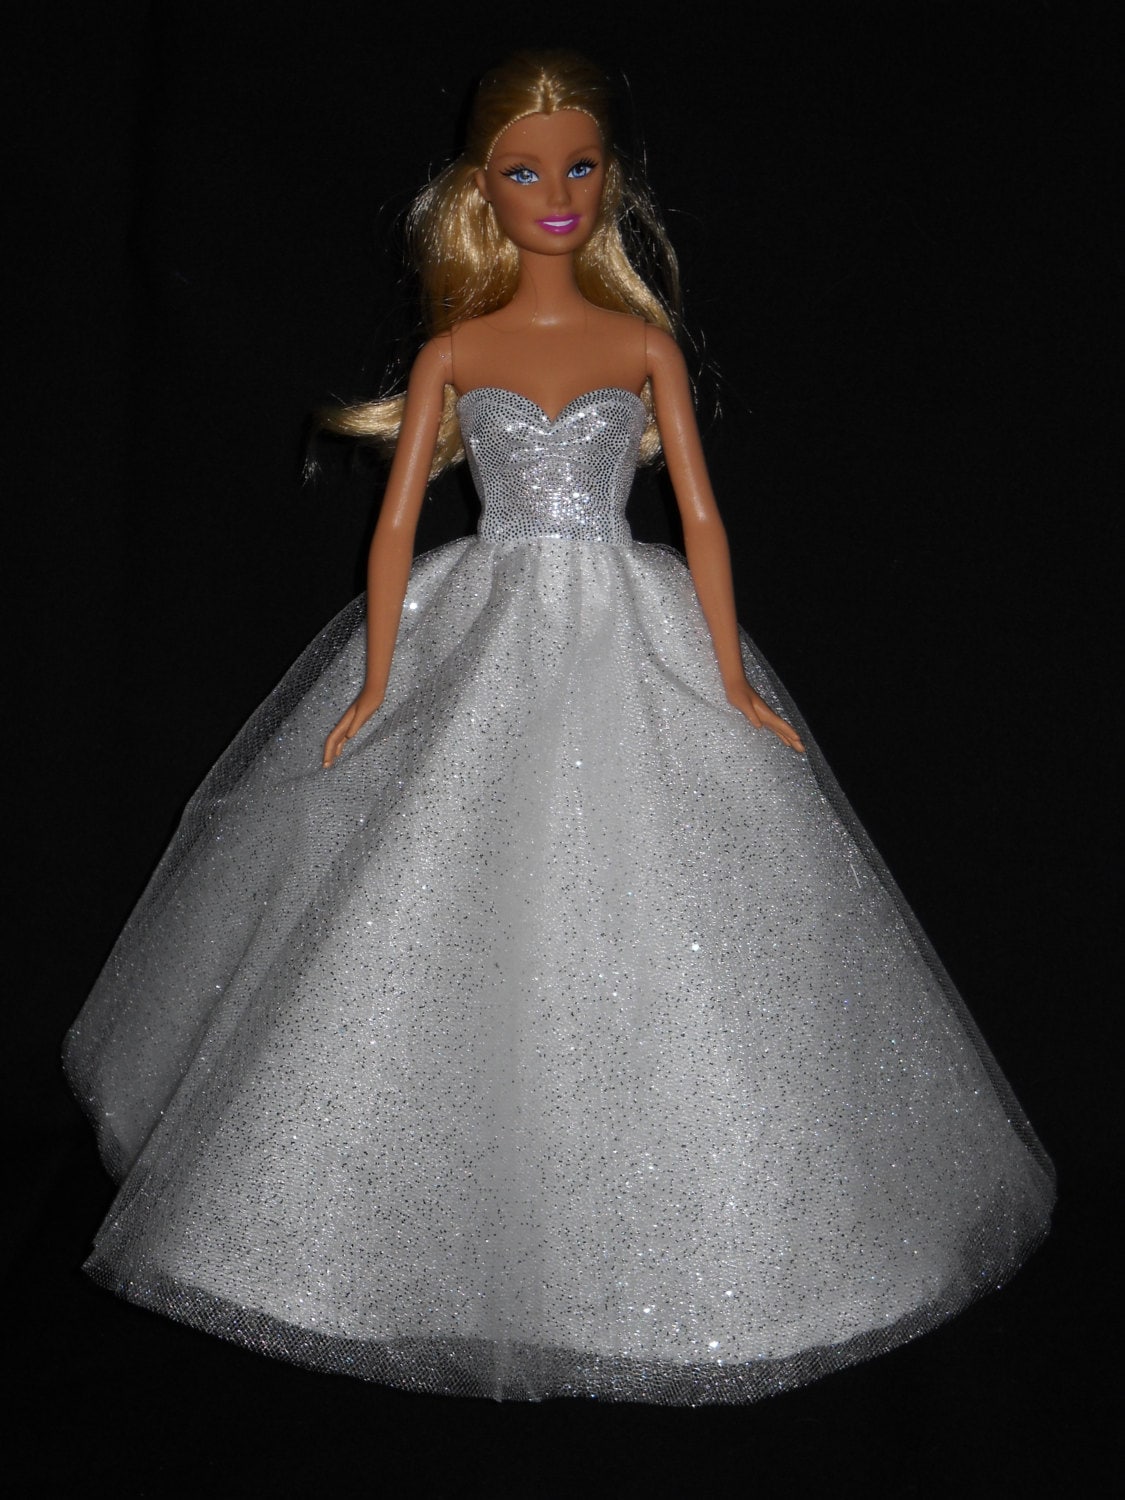 Barbie Doll Dress Handmade Silver and Sparkly White Ball Gown